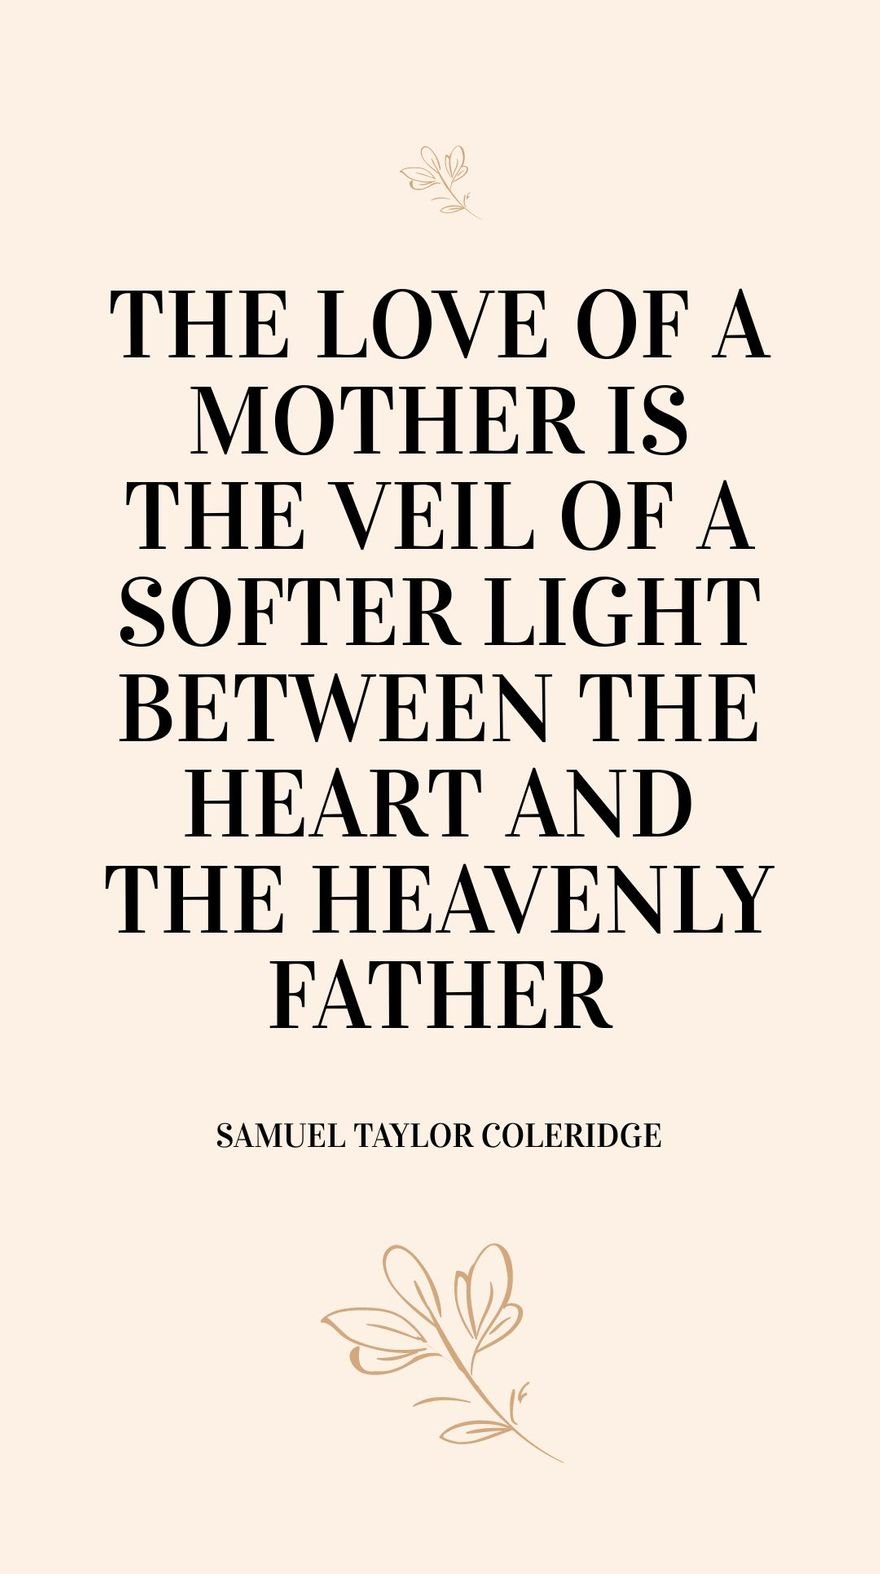 Free Samuel Taylor Coleridge - The love of a mother is the veil of a softer light between the heart and the heavenly Father.  in JPG